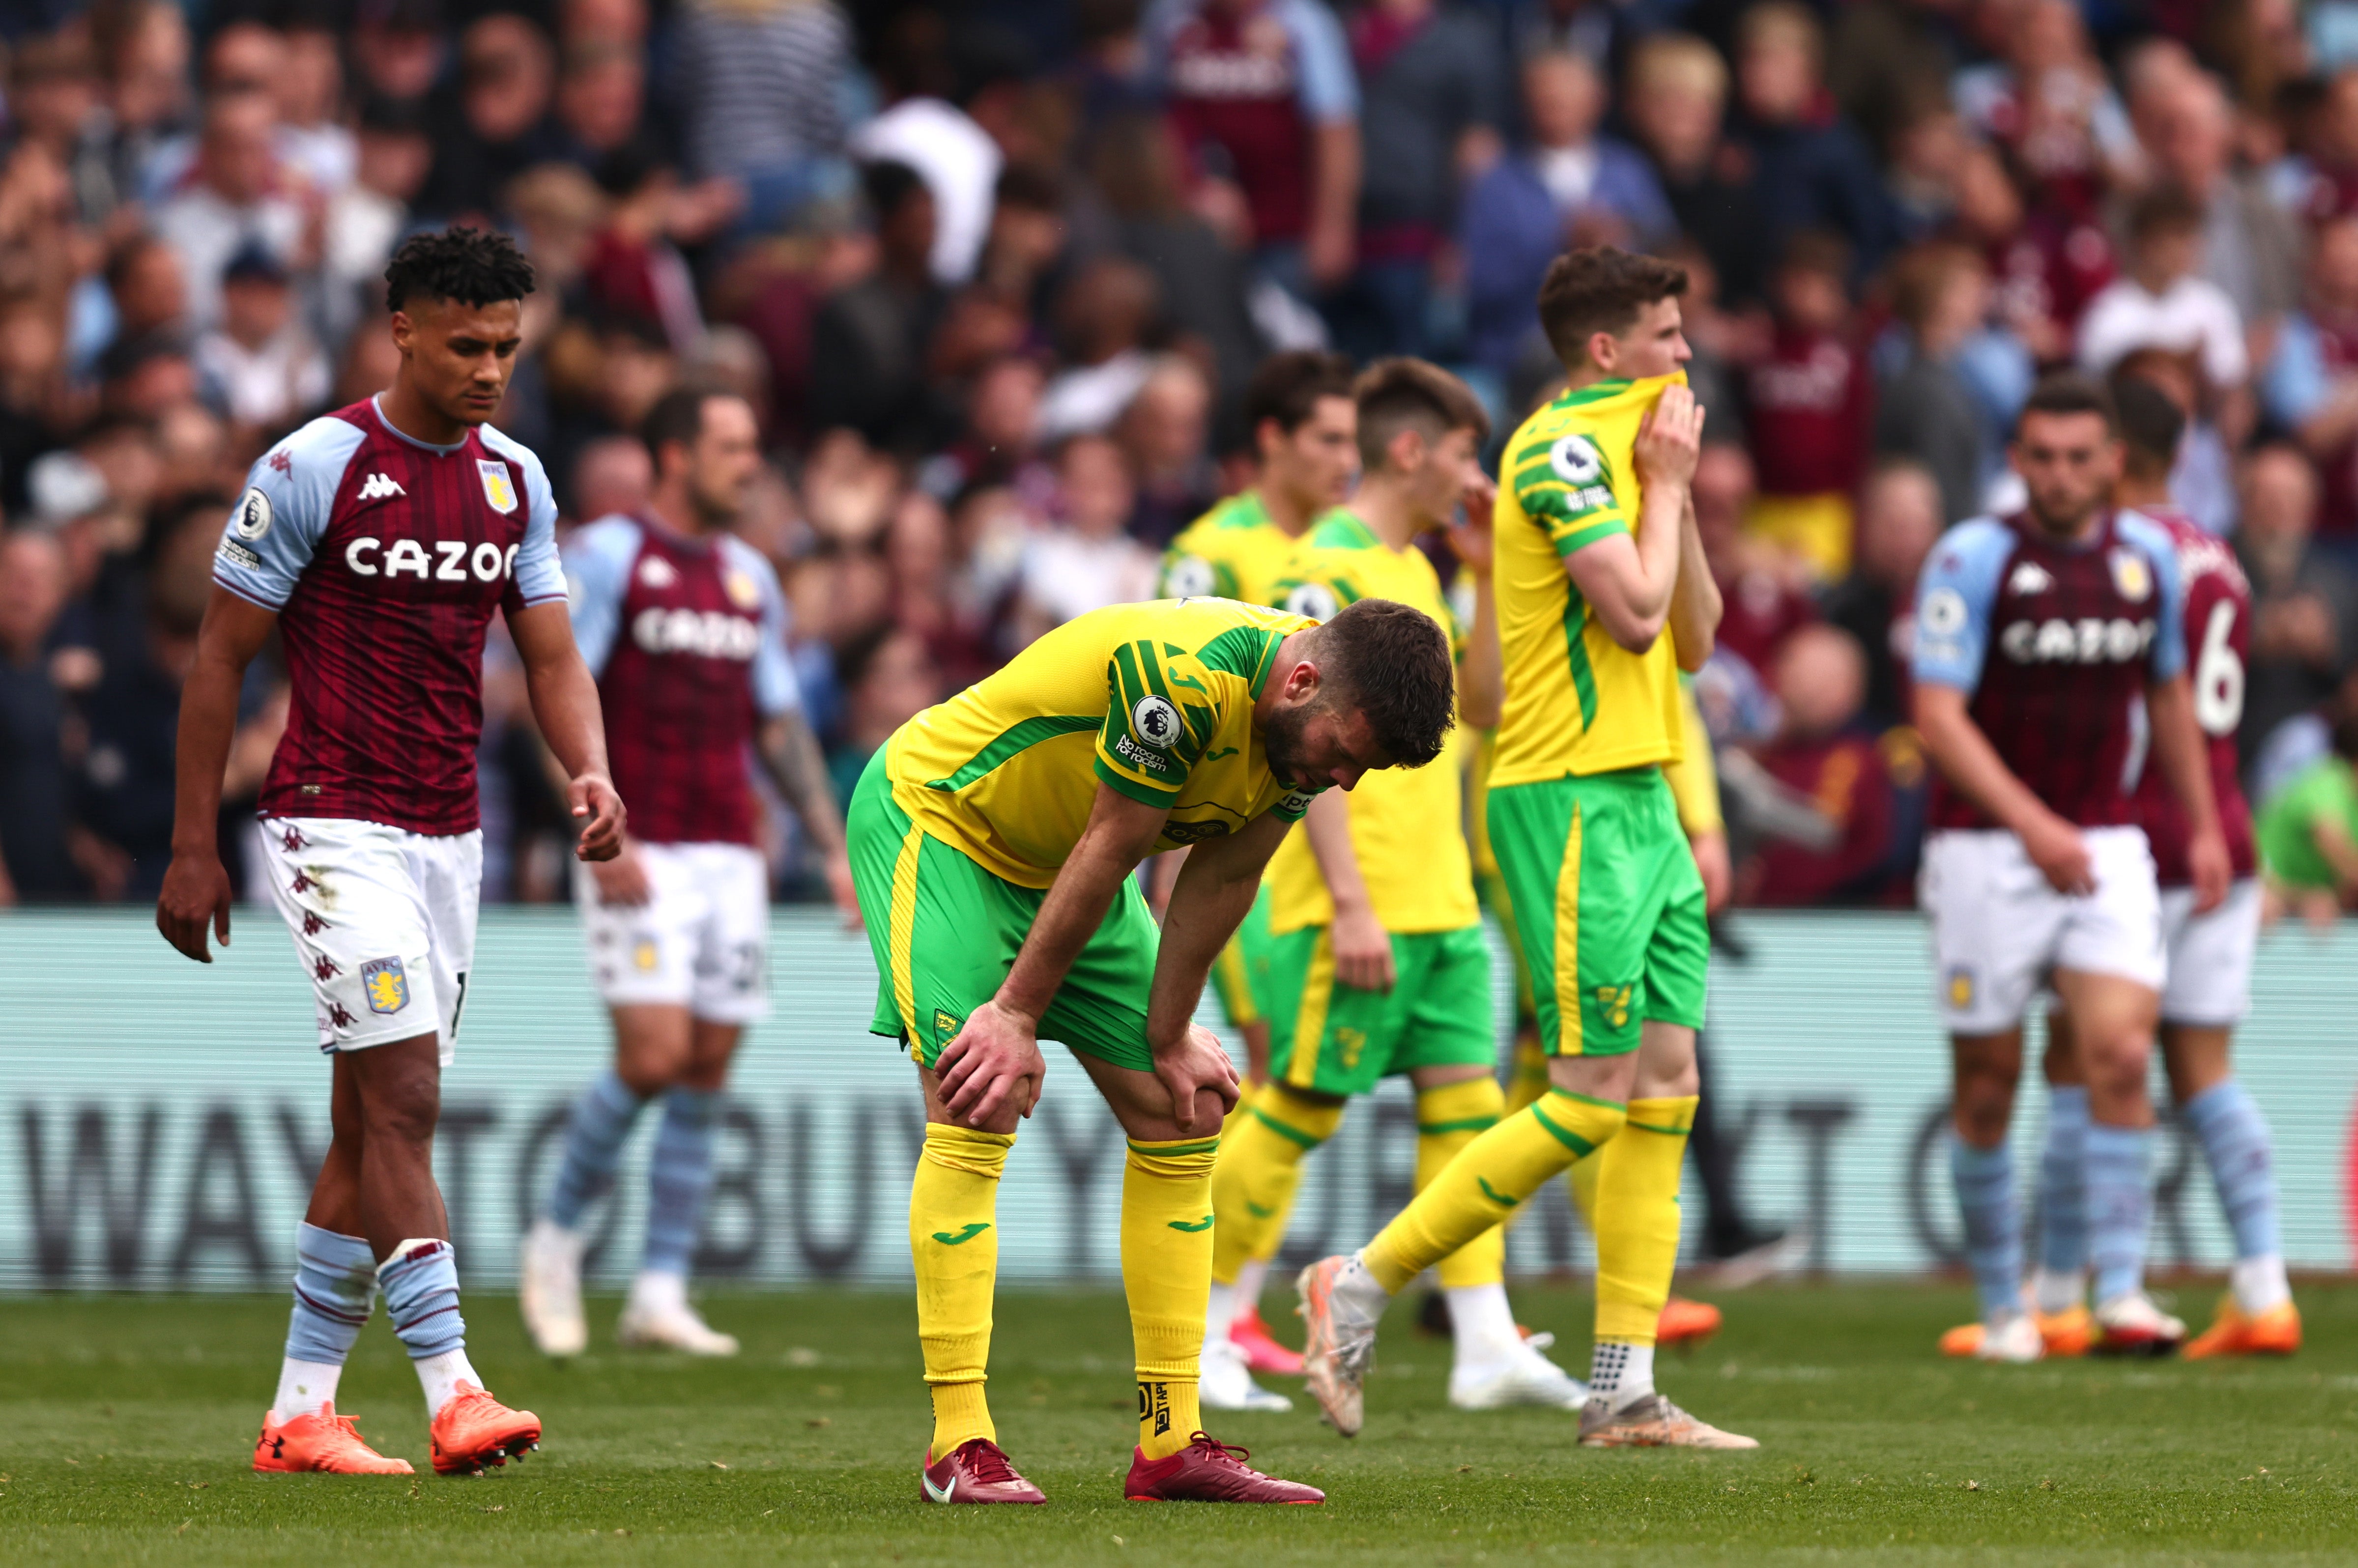 Norwich were relegated back to the Championship